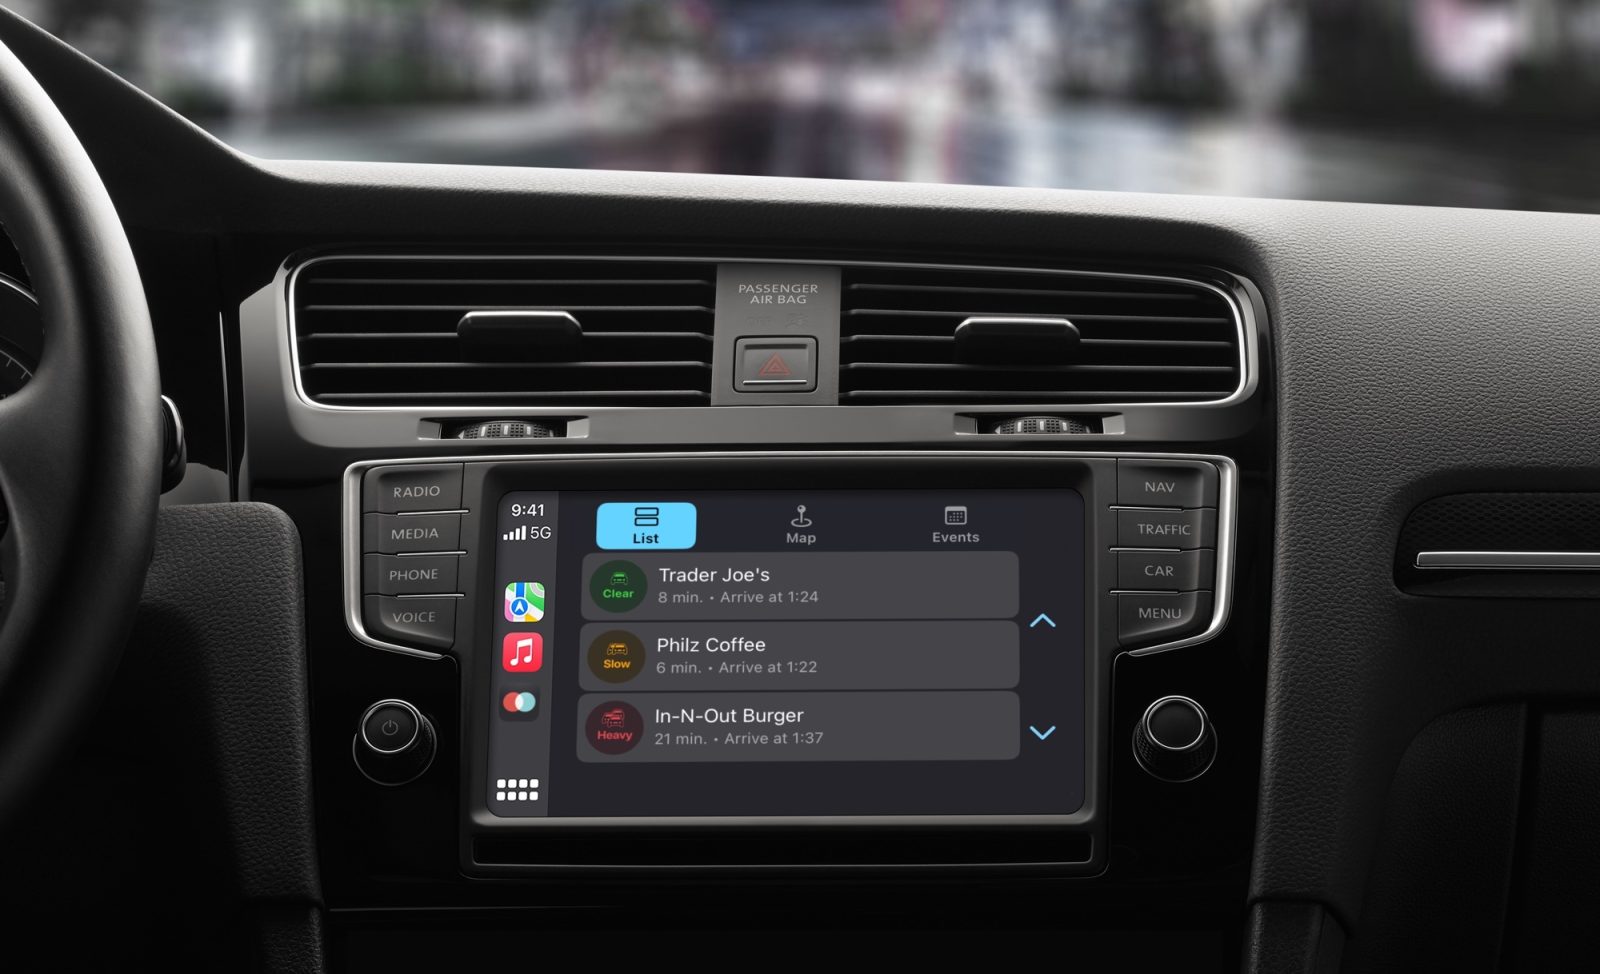 Commuter app eta arrives on carplay with travel times and